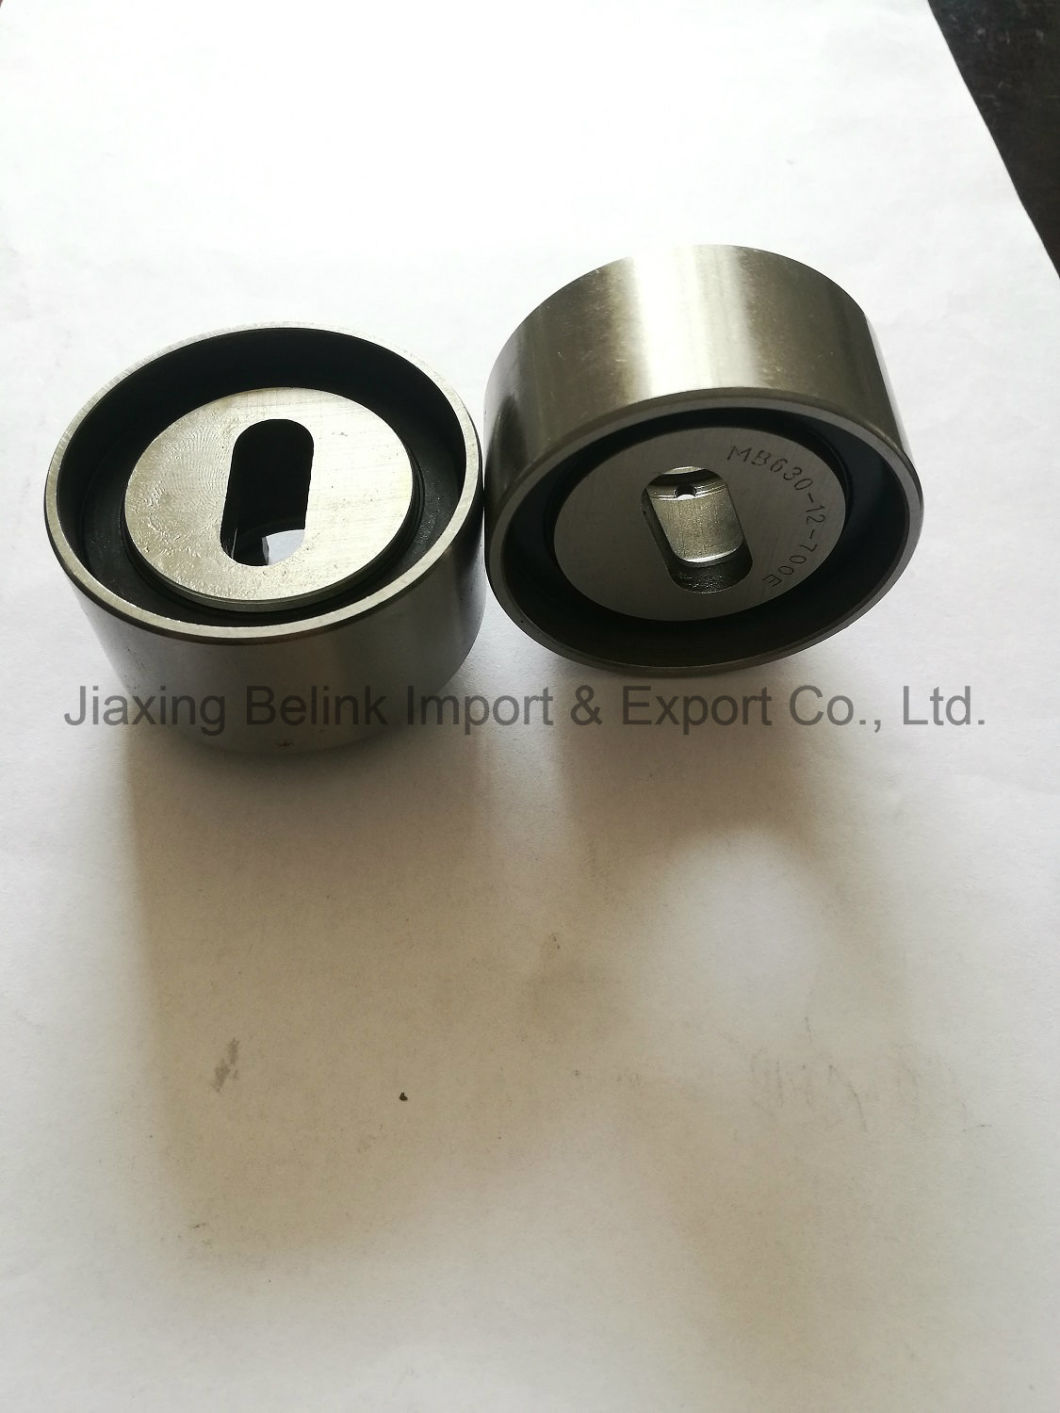 Tension Pulley Idler Bearing Belt Tension Pulley Auto Bearings MB630-12-700e